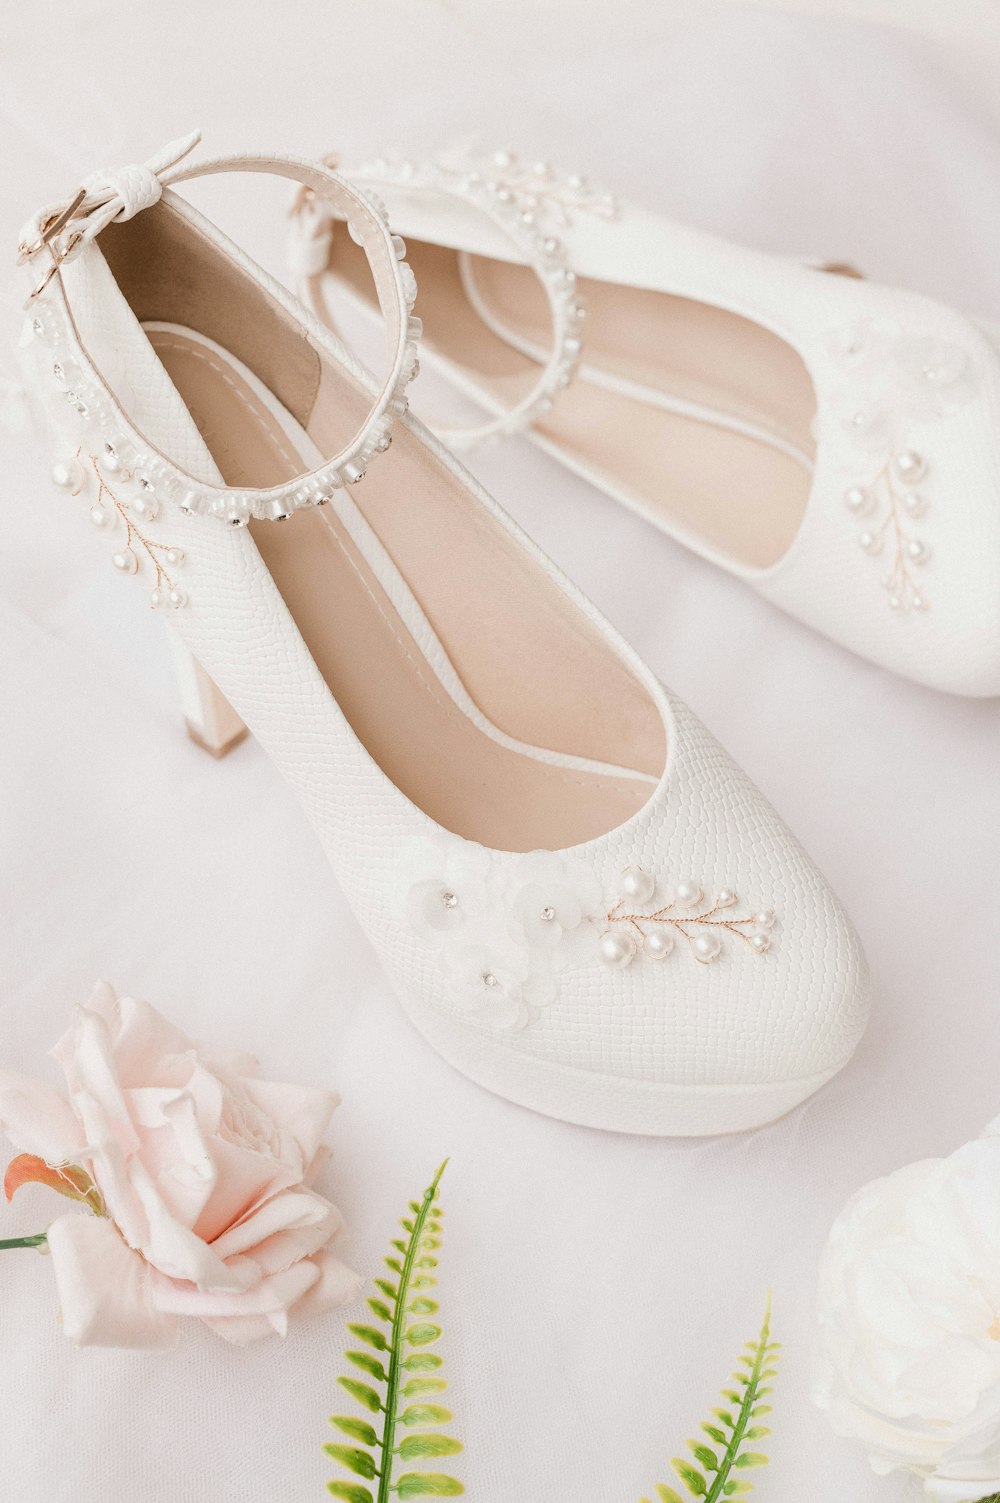 white and gray floral peep toe heeled sandals